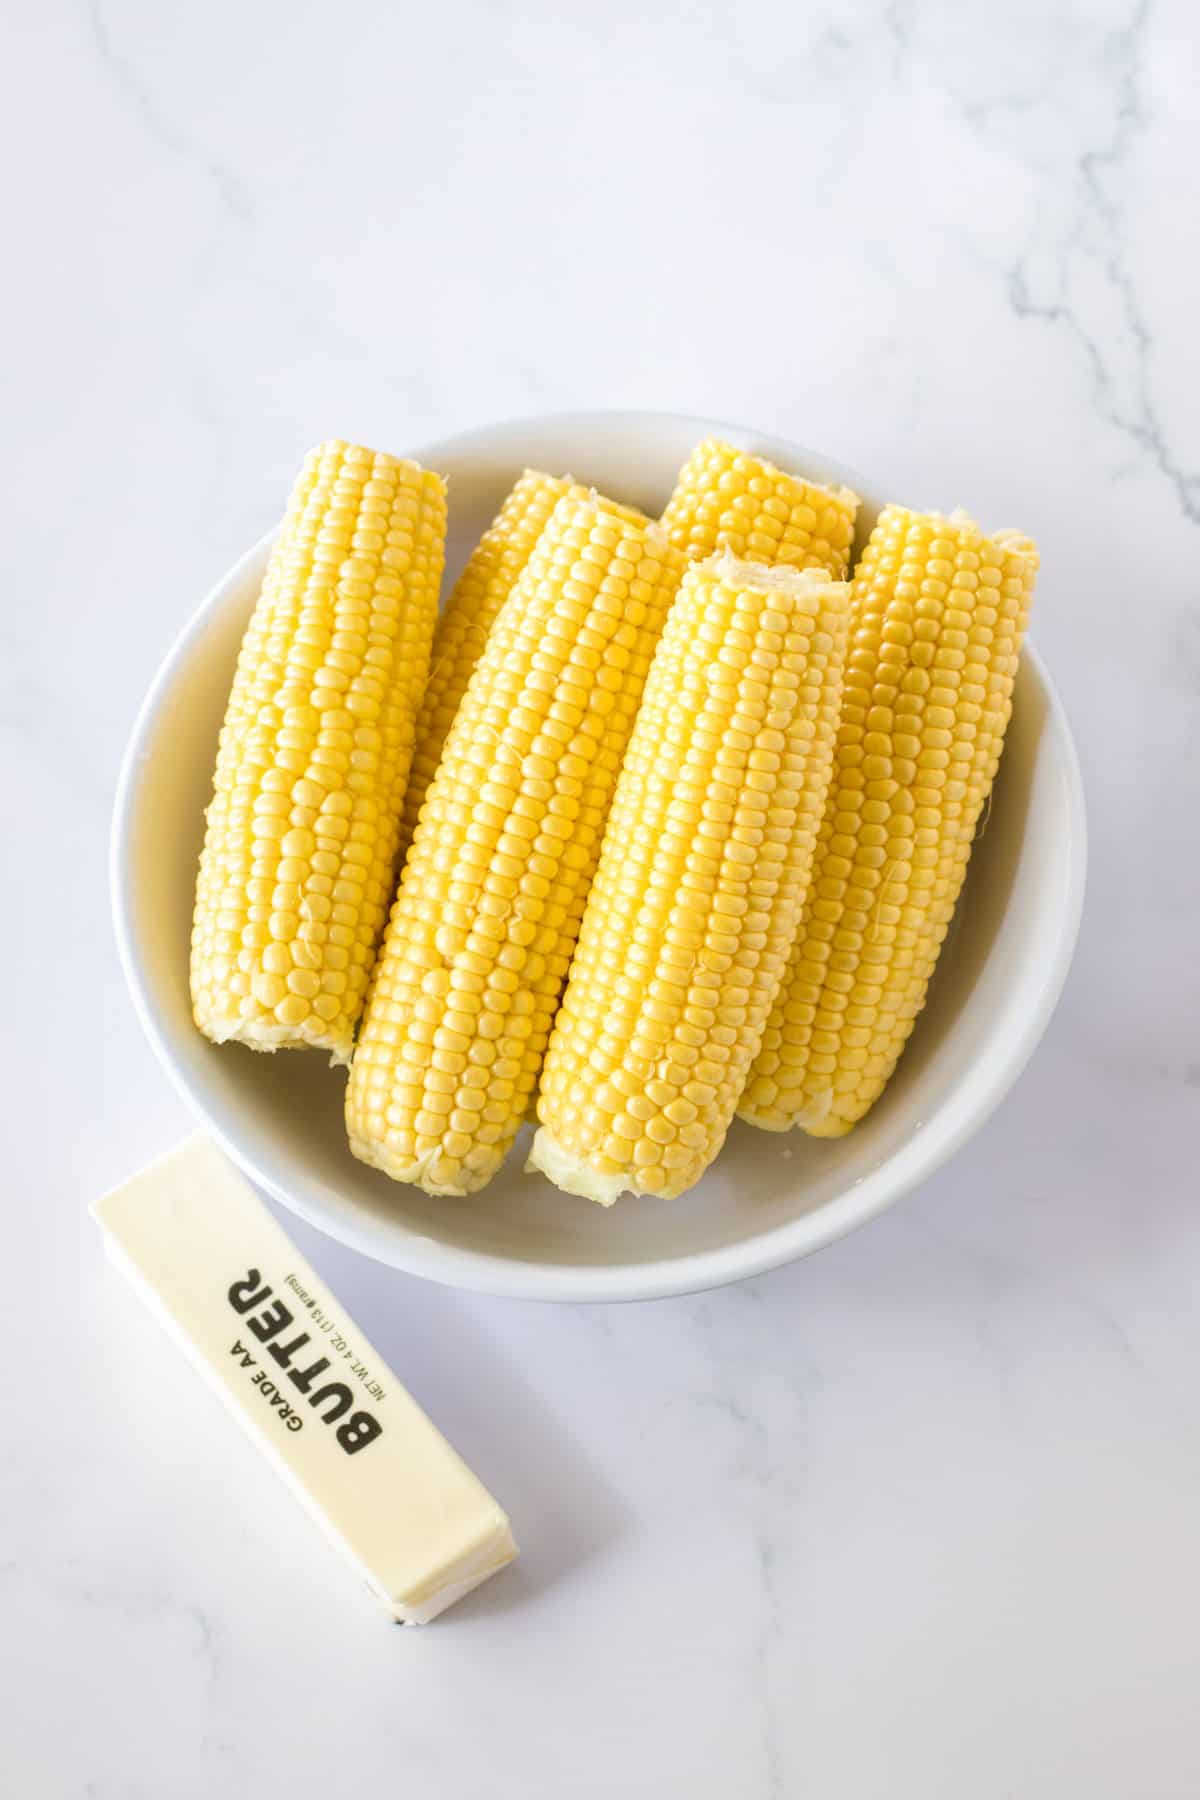 Corn on the cob and stick of butter.